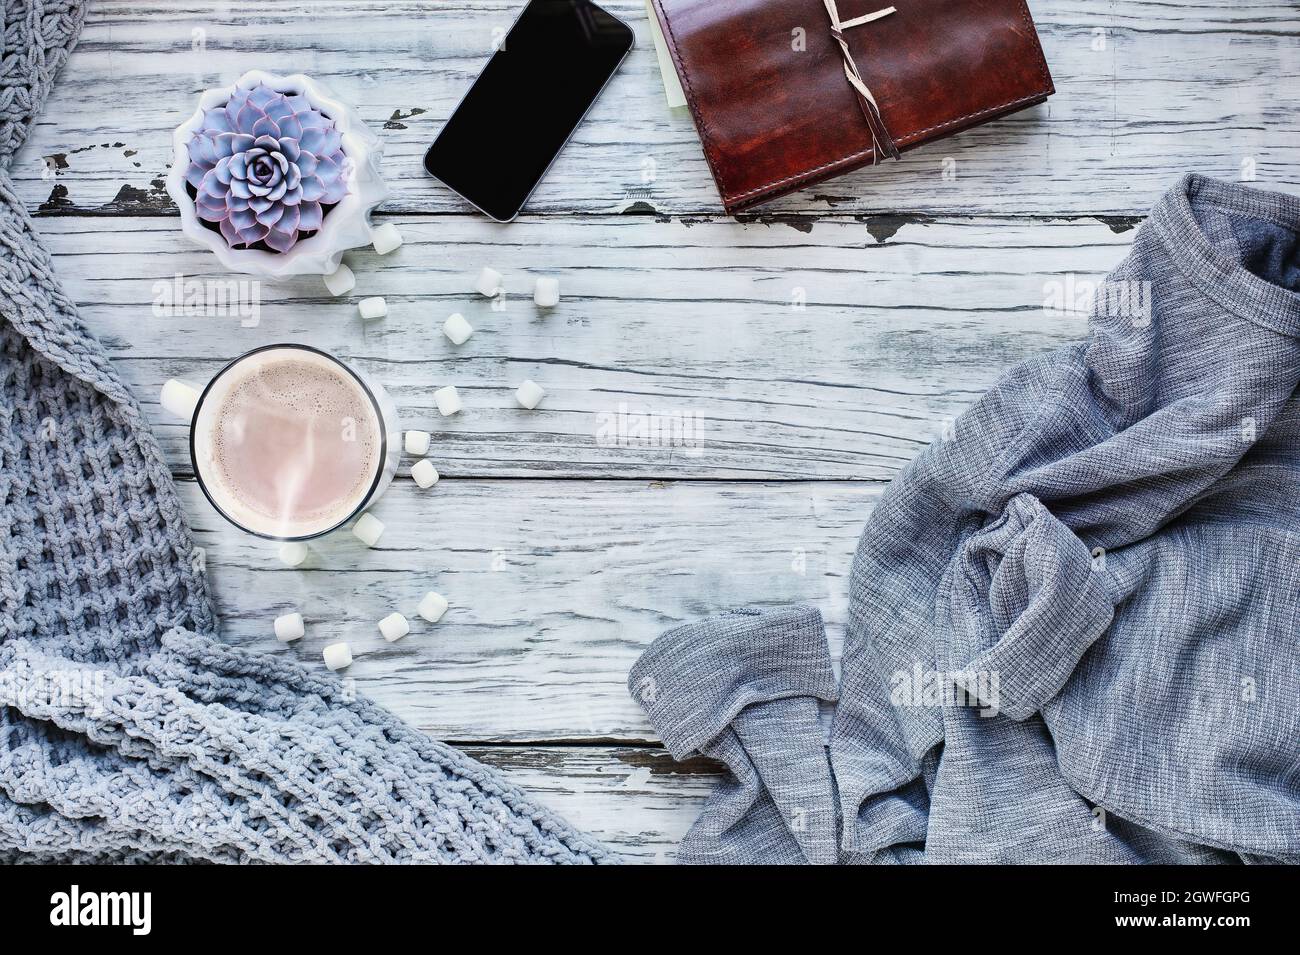 Autumn or winter background shot from top view with hot cocoa, houseplant, cell phone, book, throw blanket and sweater over rustic wood table Stock Photo